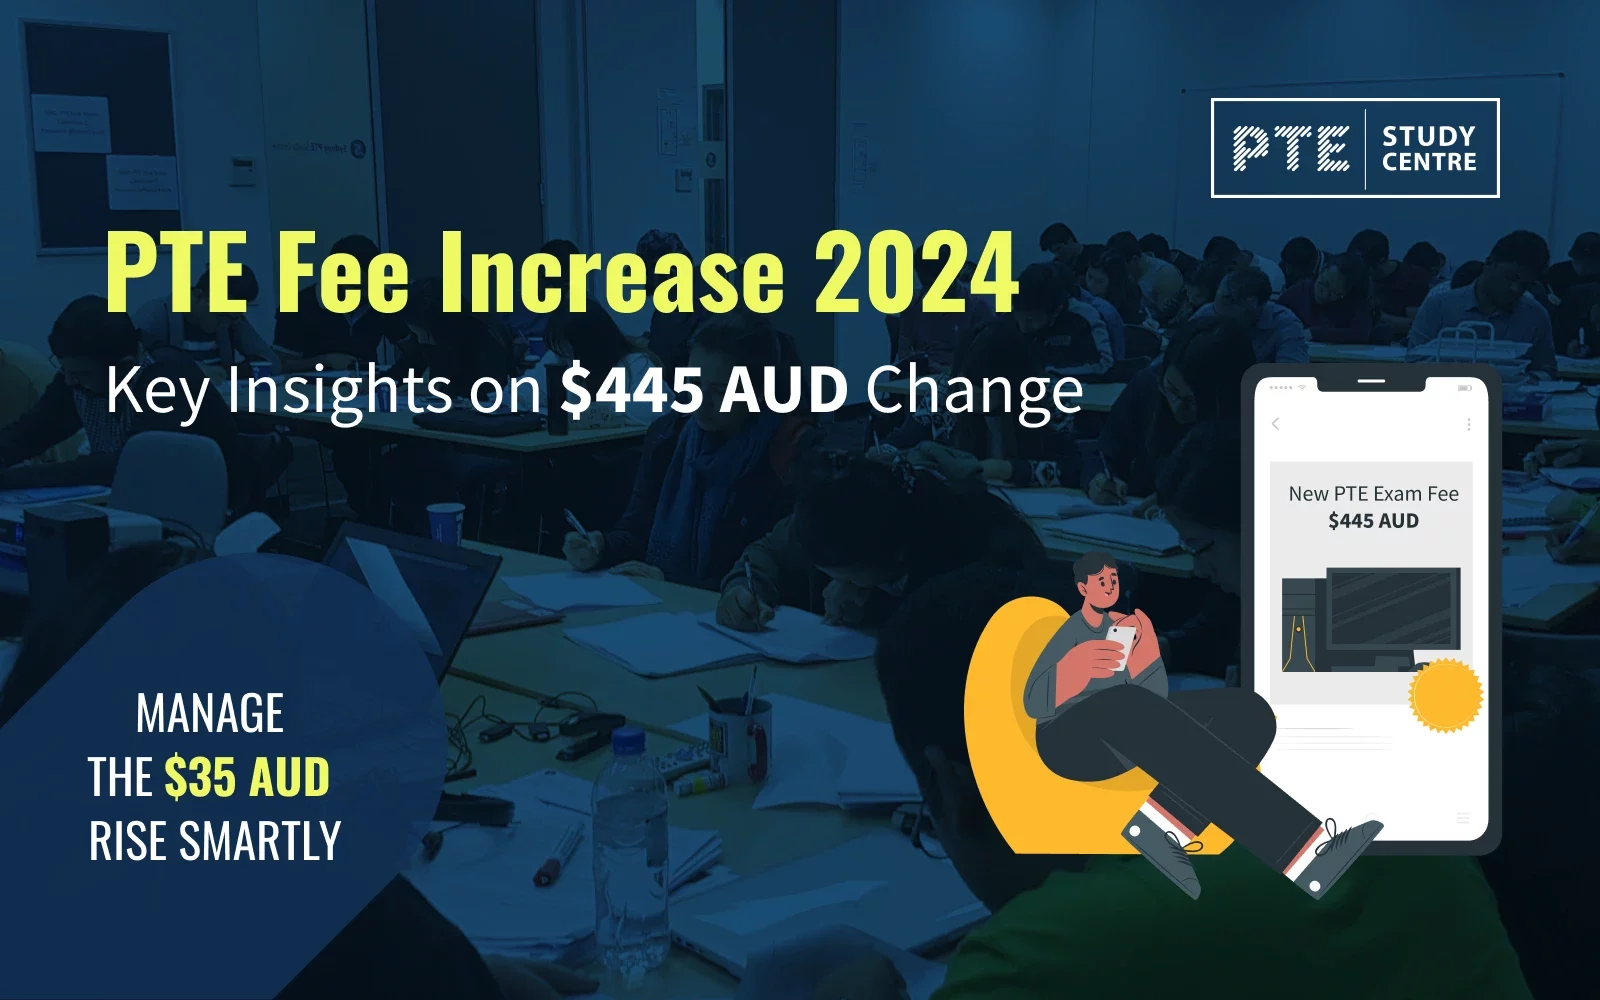 PTE Fee Increase 2024: Key Insights on AUD 445 Change